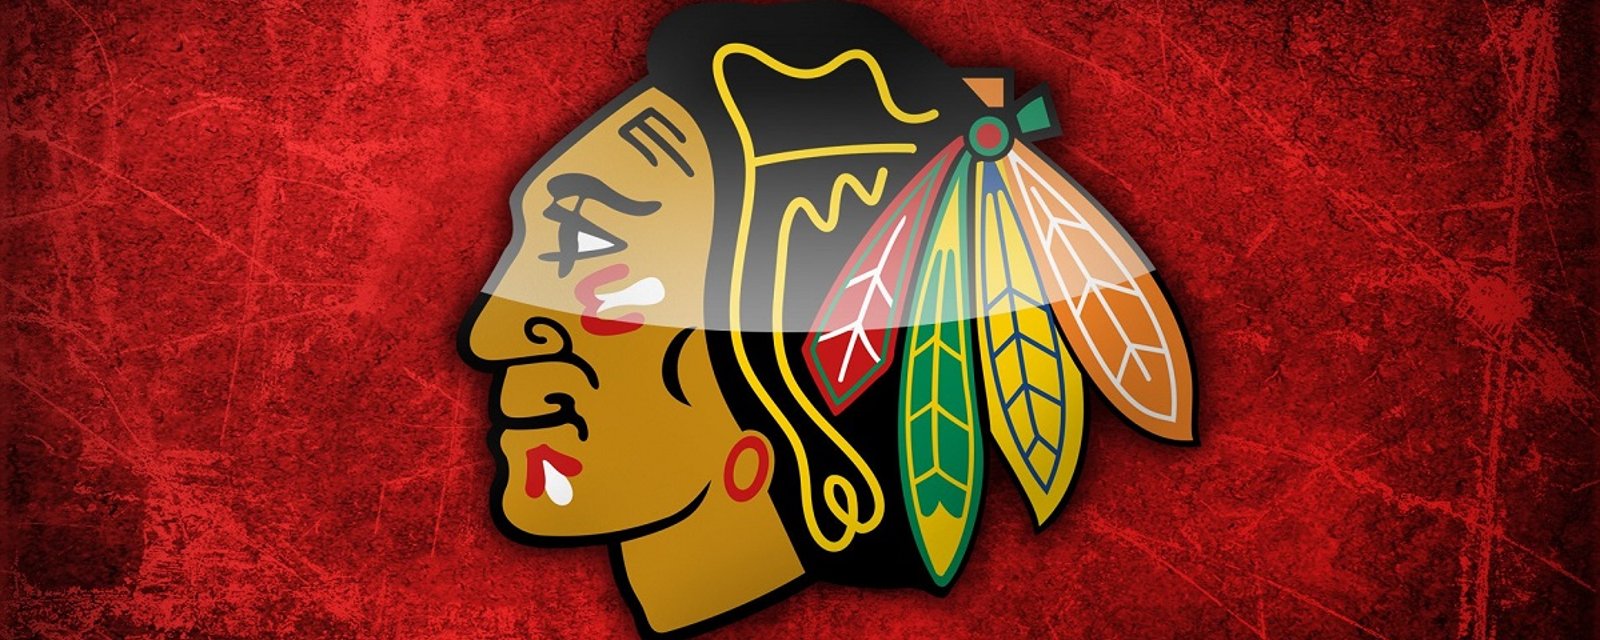 Breaking: Former Blackhawk coming back to Chicago in a trade!